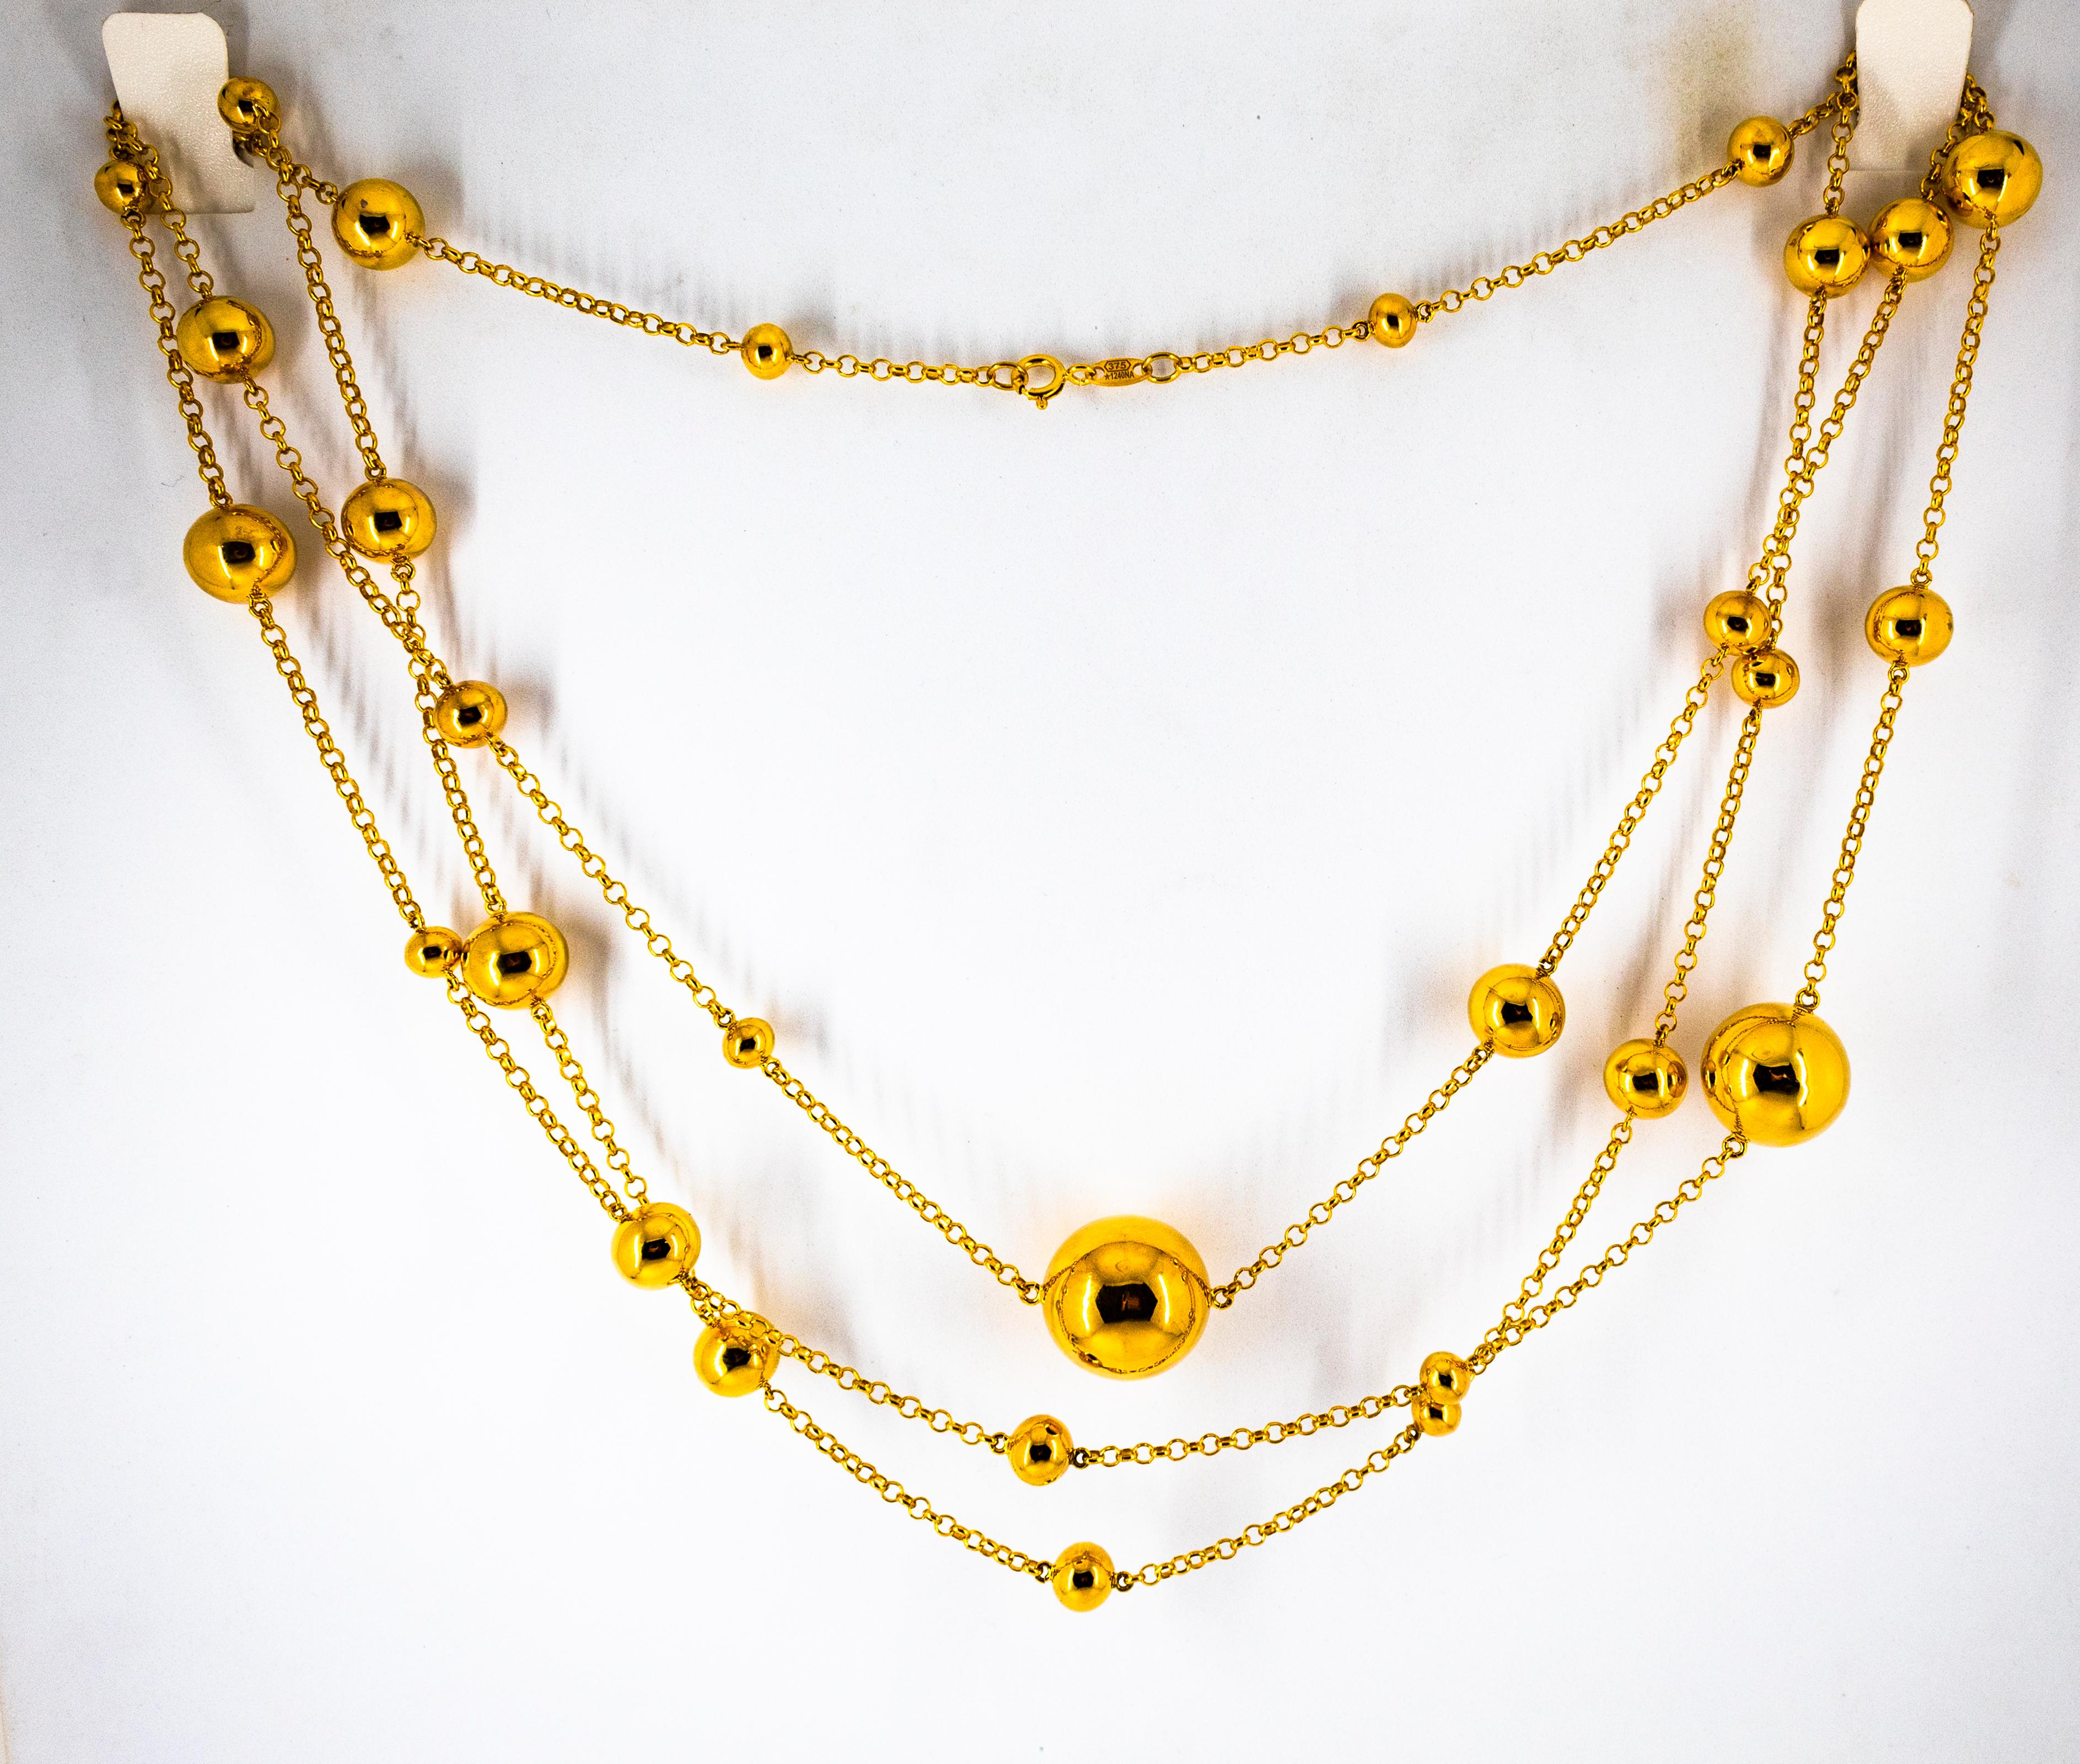 This Necklace is made of 9K Yellow Gold.
This Necklace is inspired by Art Deco.
The Necklace Length is 160cm.

We're a workshop so every piece is handmade, customizable and resizable. 